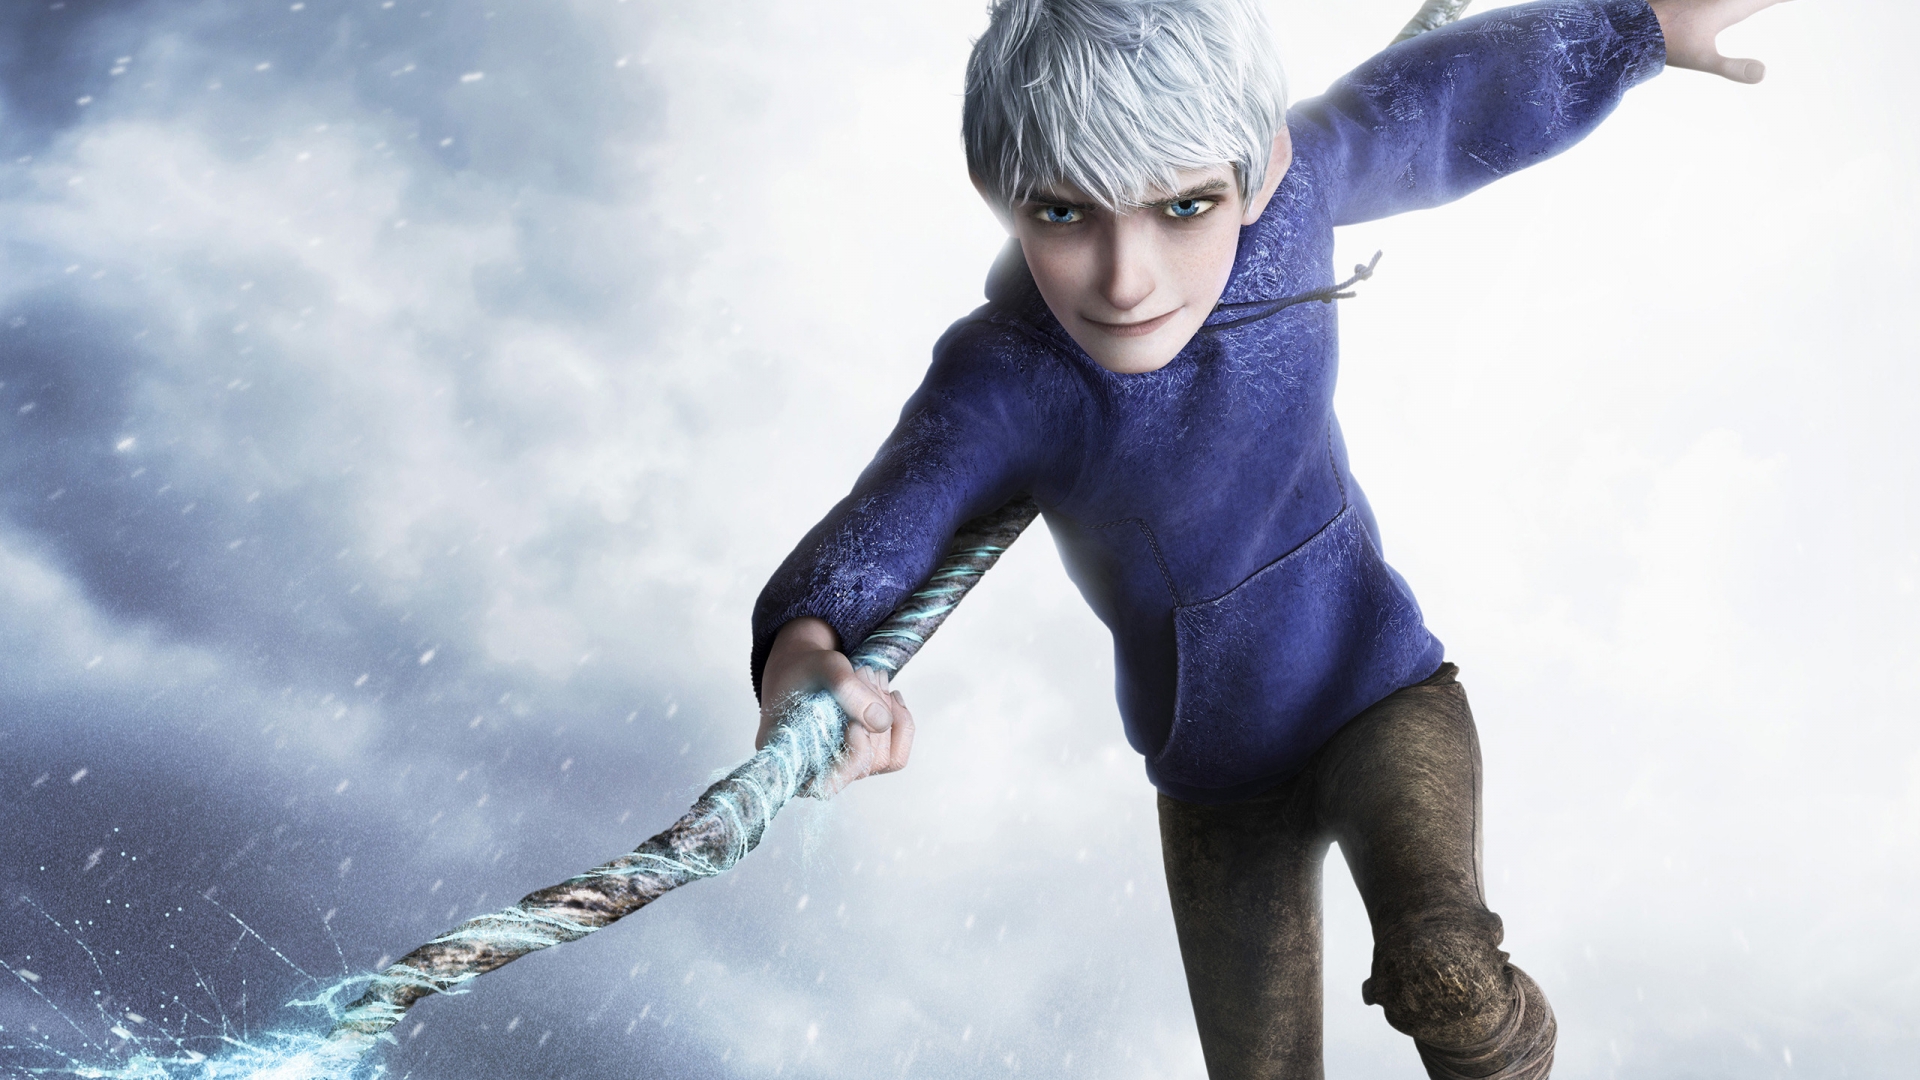 Jack Frost Rise Of The Guardians for 1920 x 1080 HDTV 1080p resolution